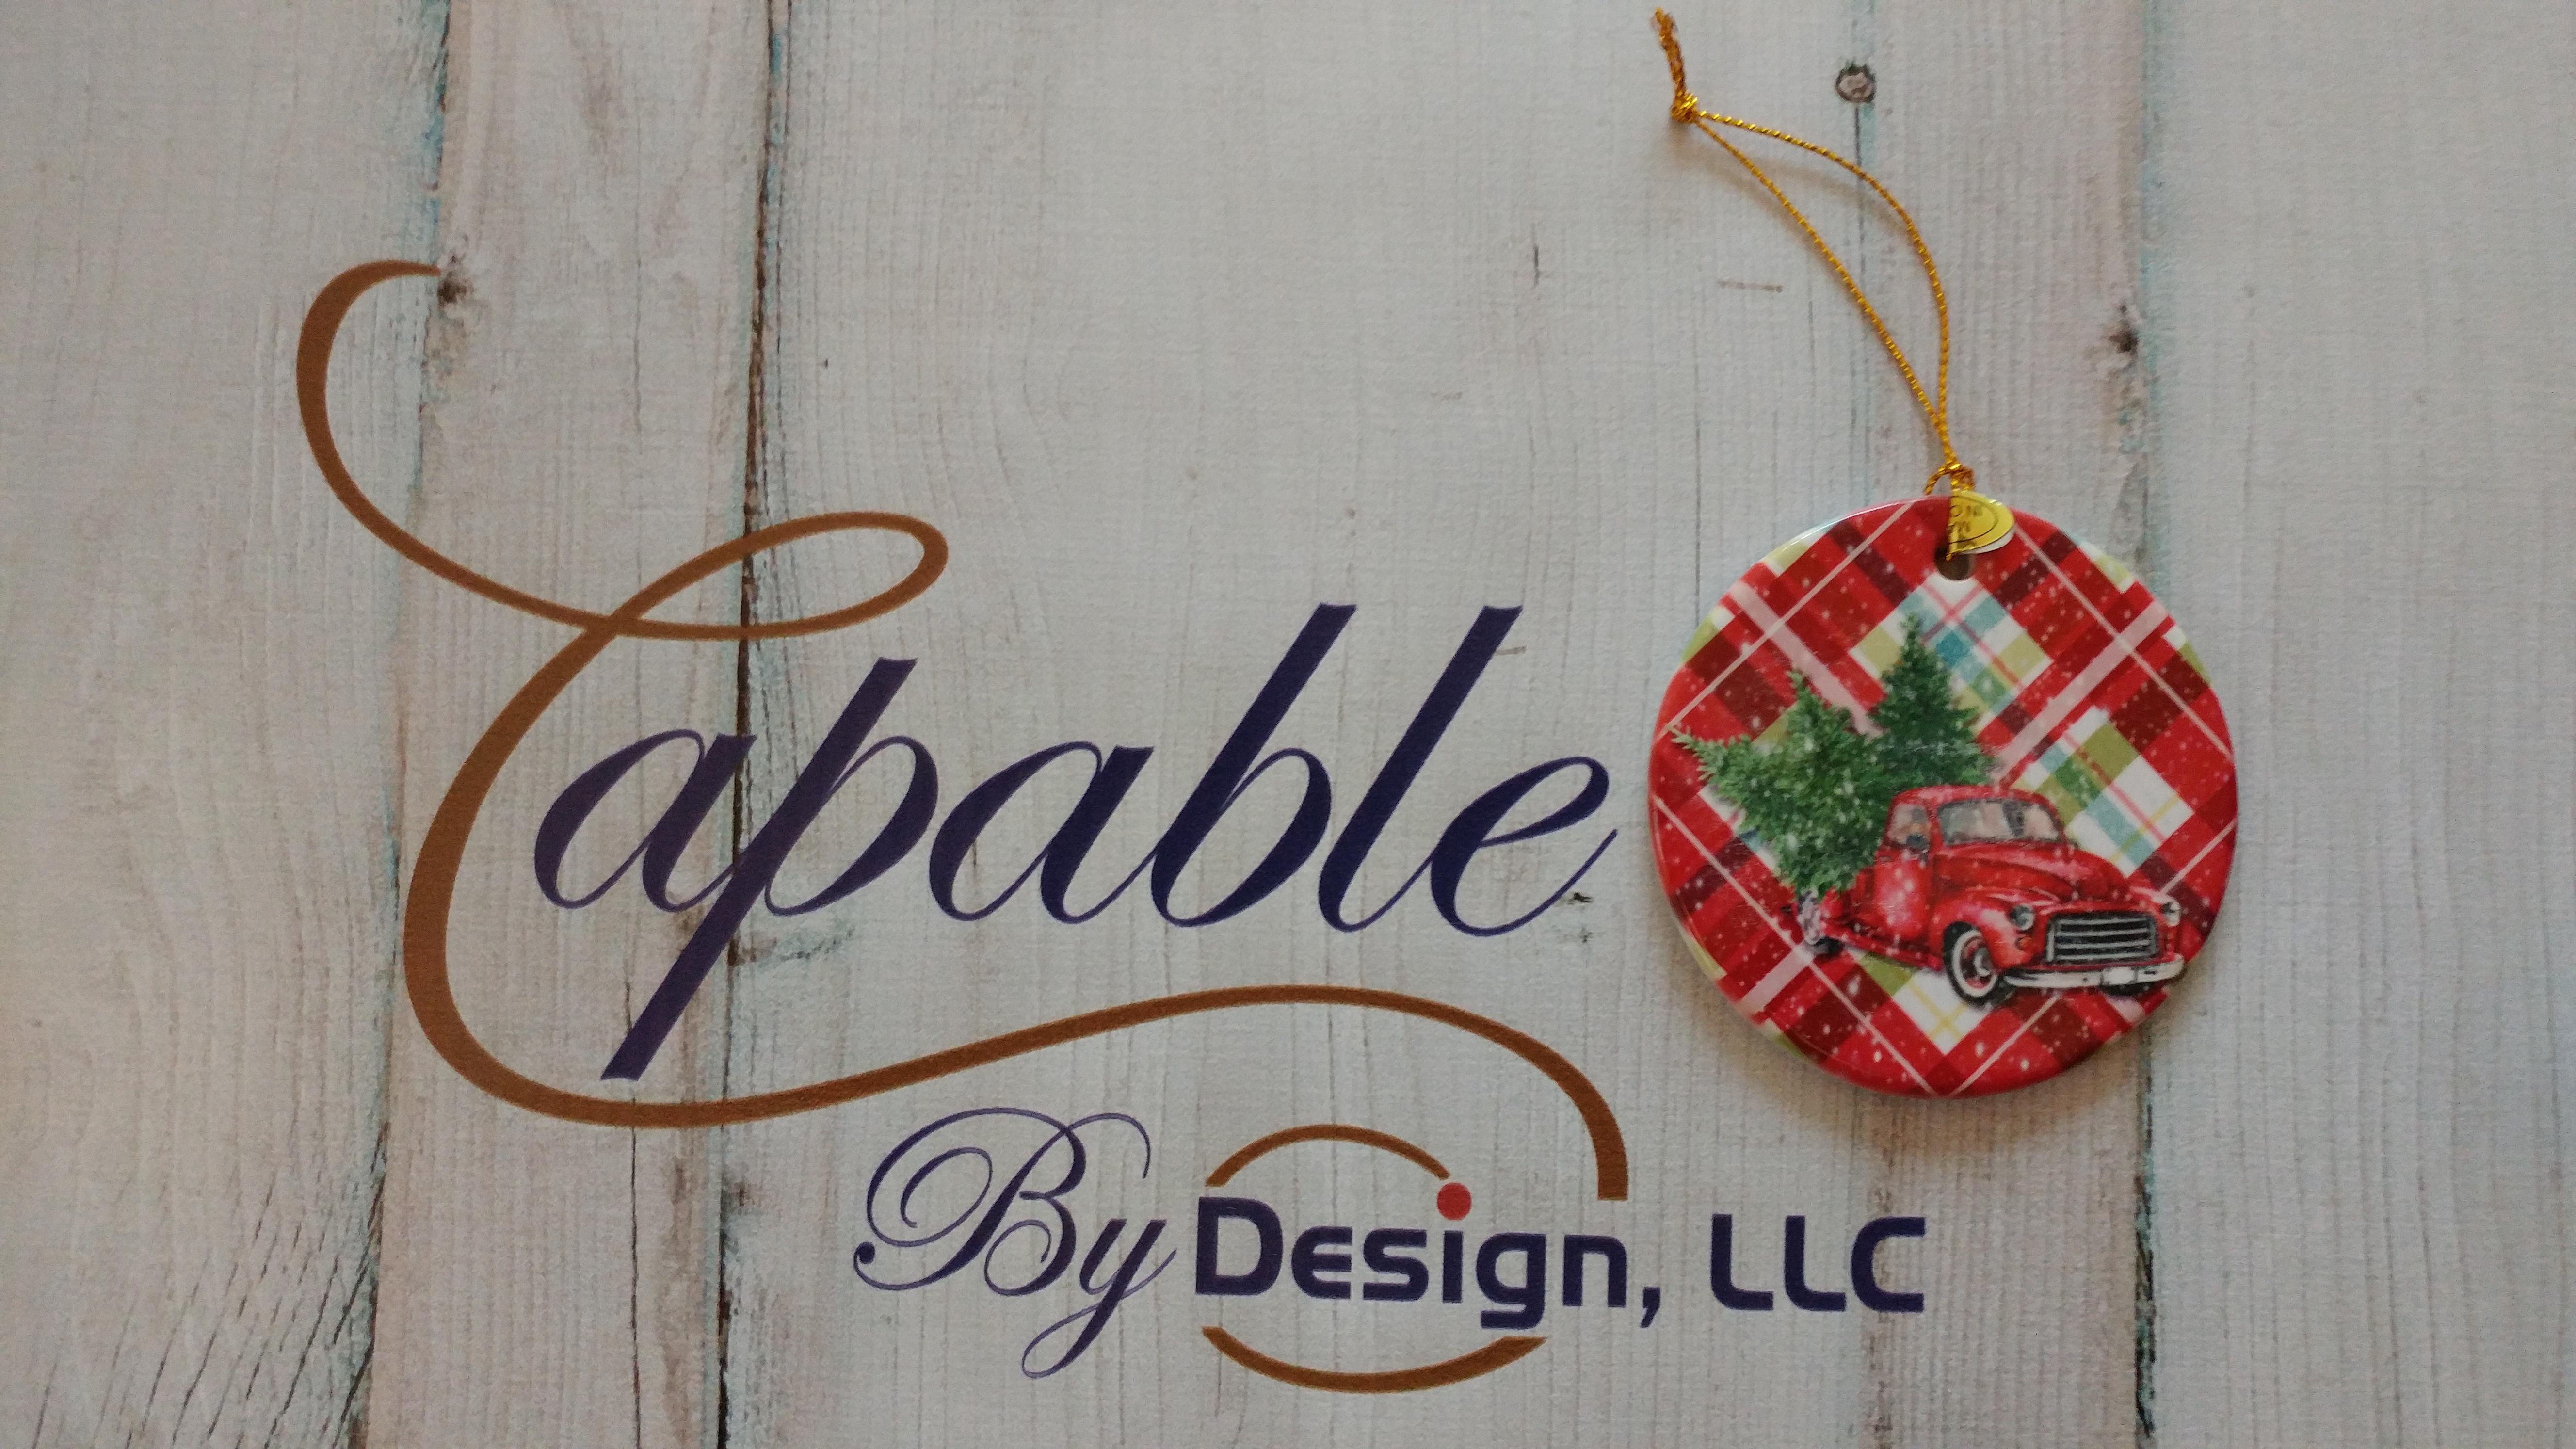 Porcelain Ornament made with sublimation printing